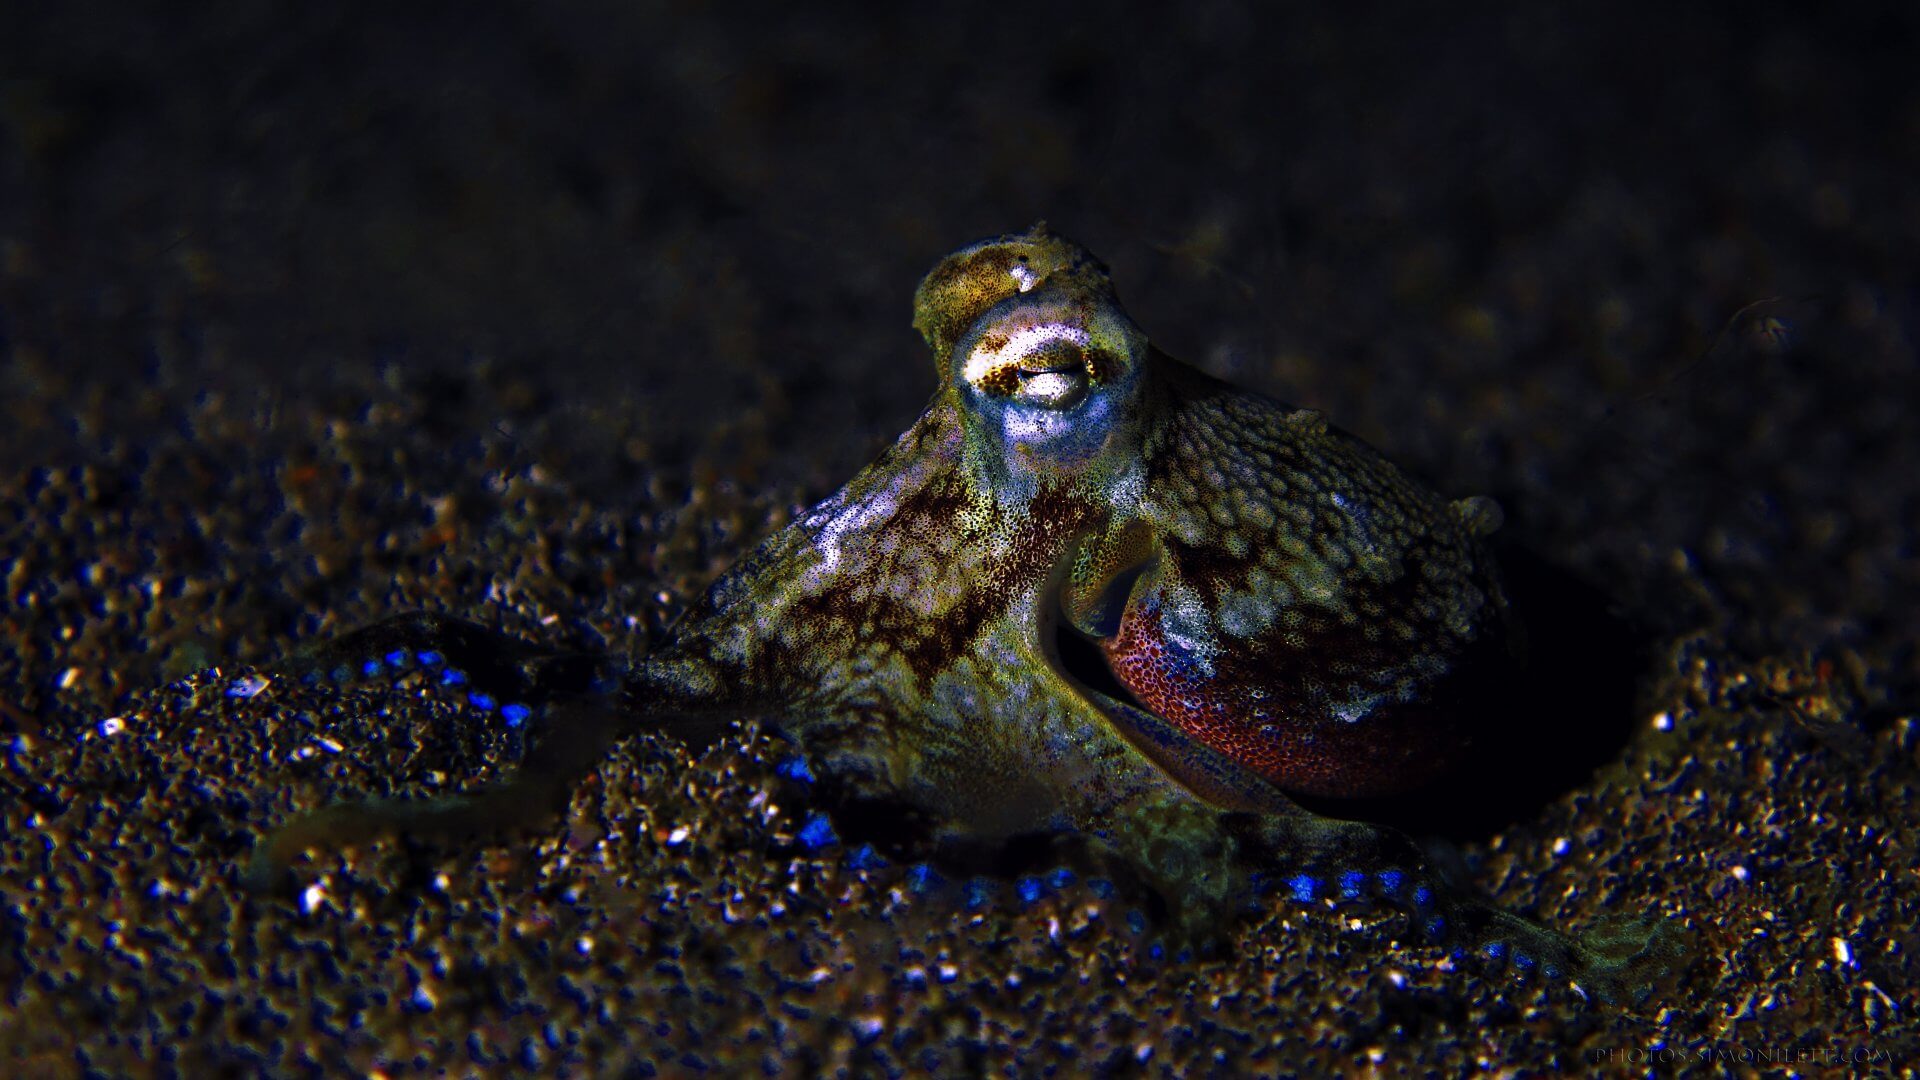 Juvenile Octopus – Hunting In The Muck